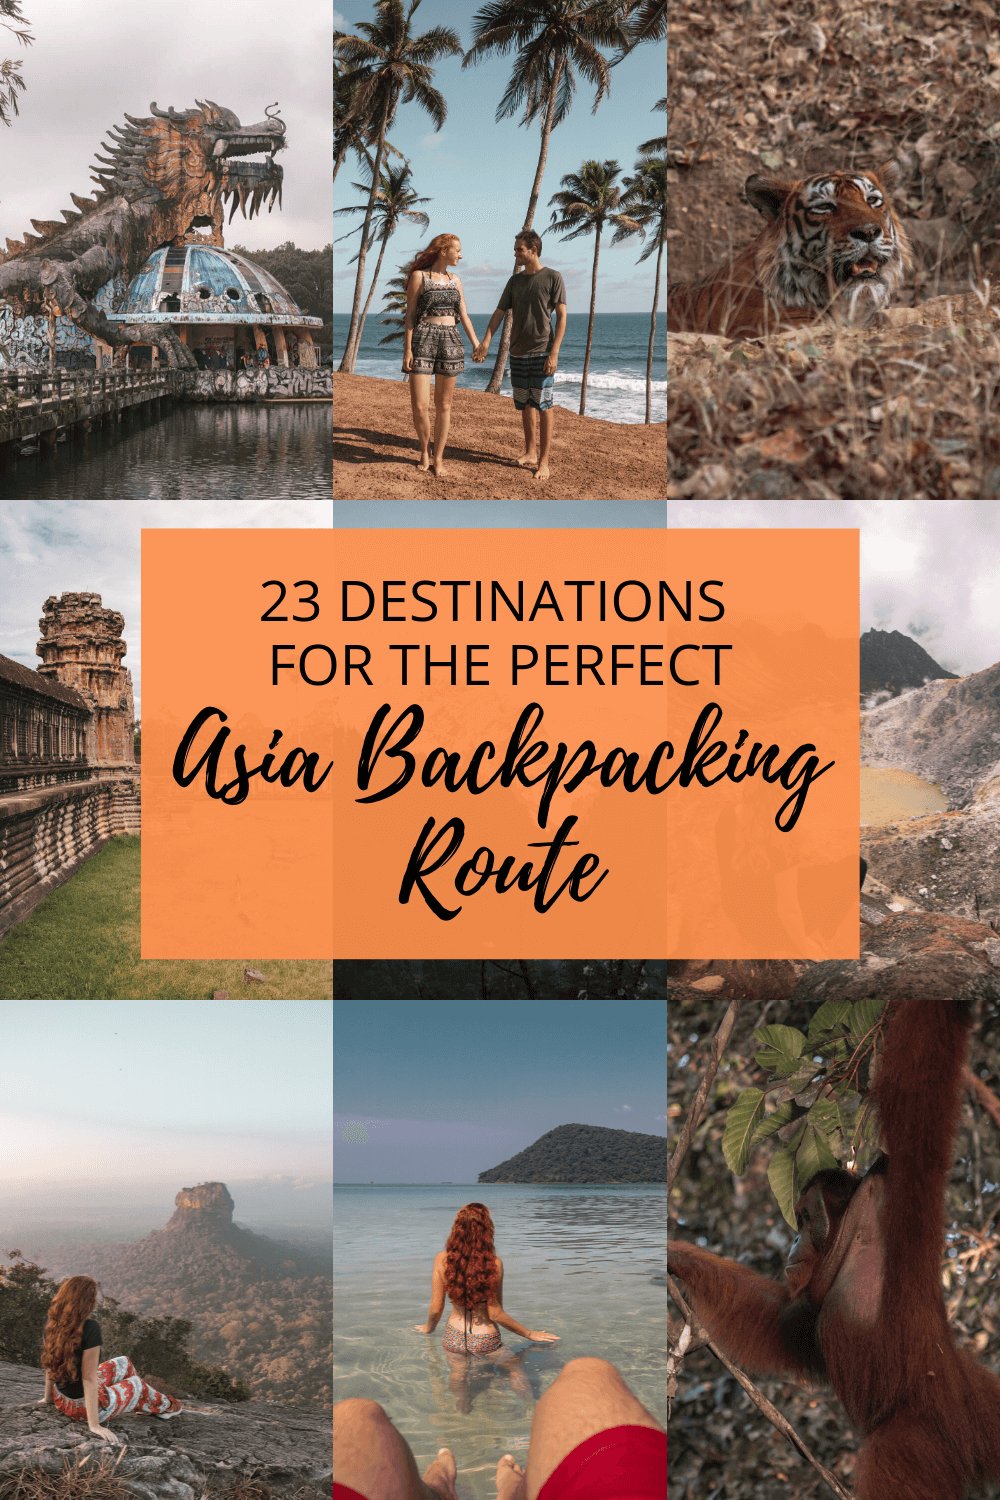 Asia backpacking route